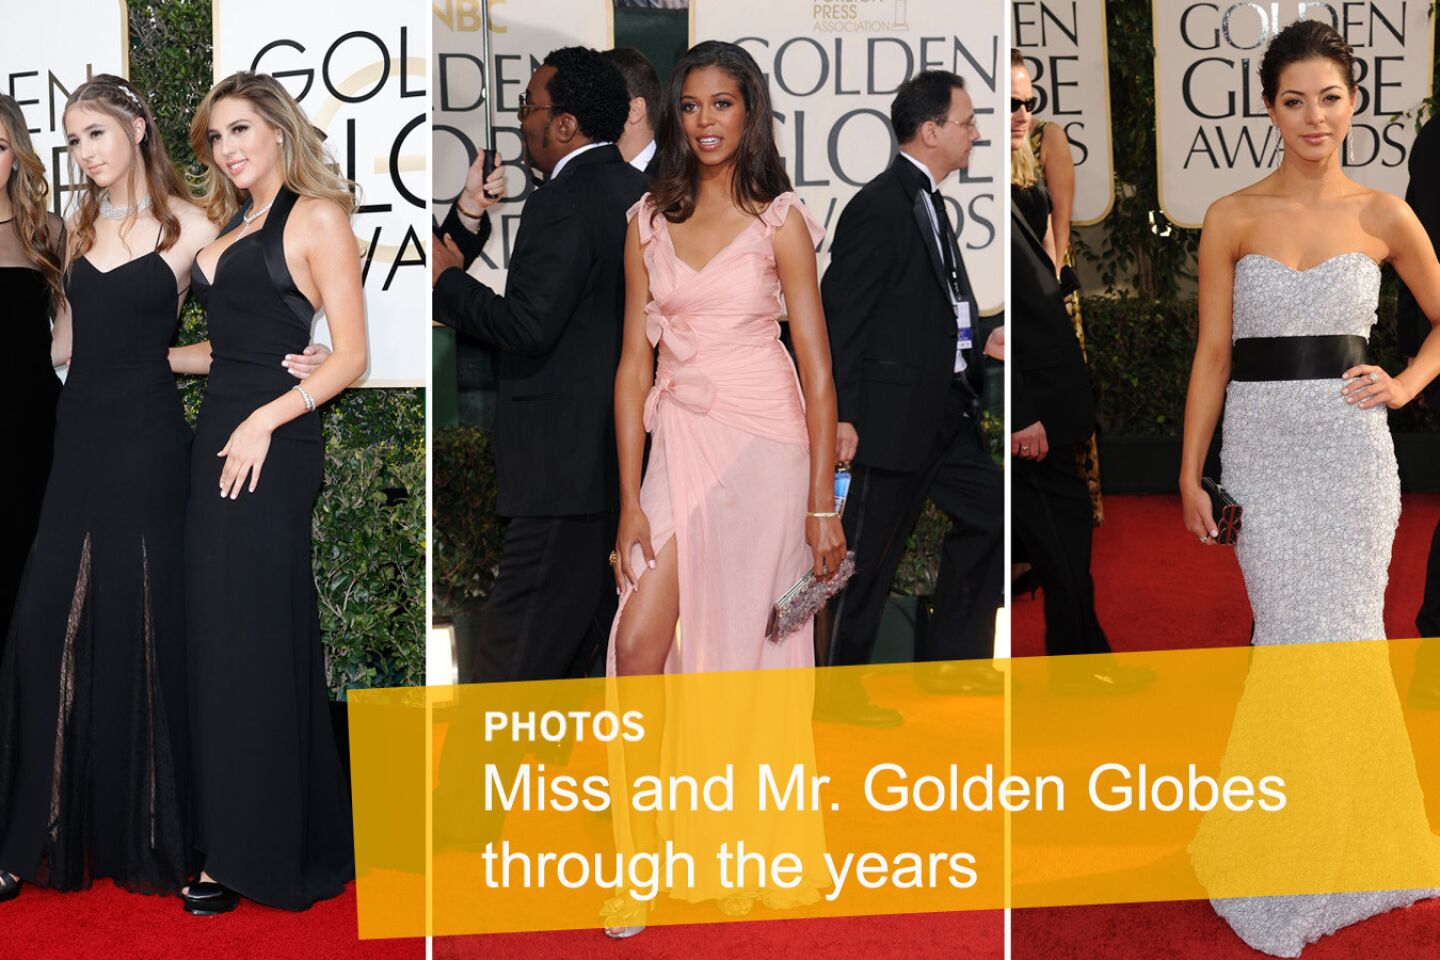 Miss and Mr. Golden Globe through the years